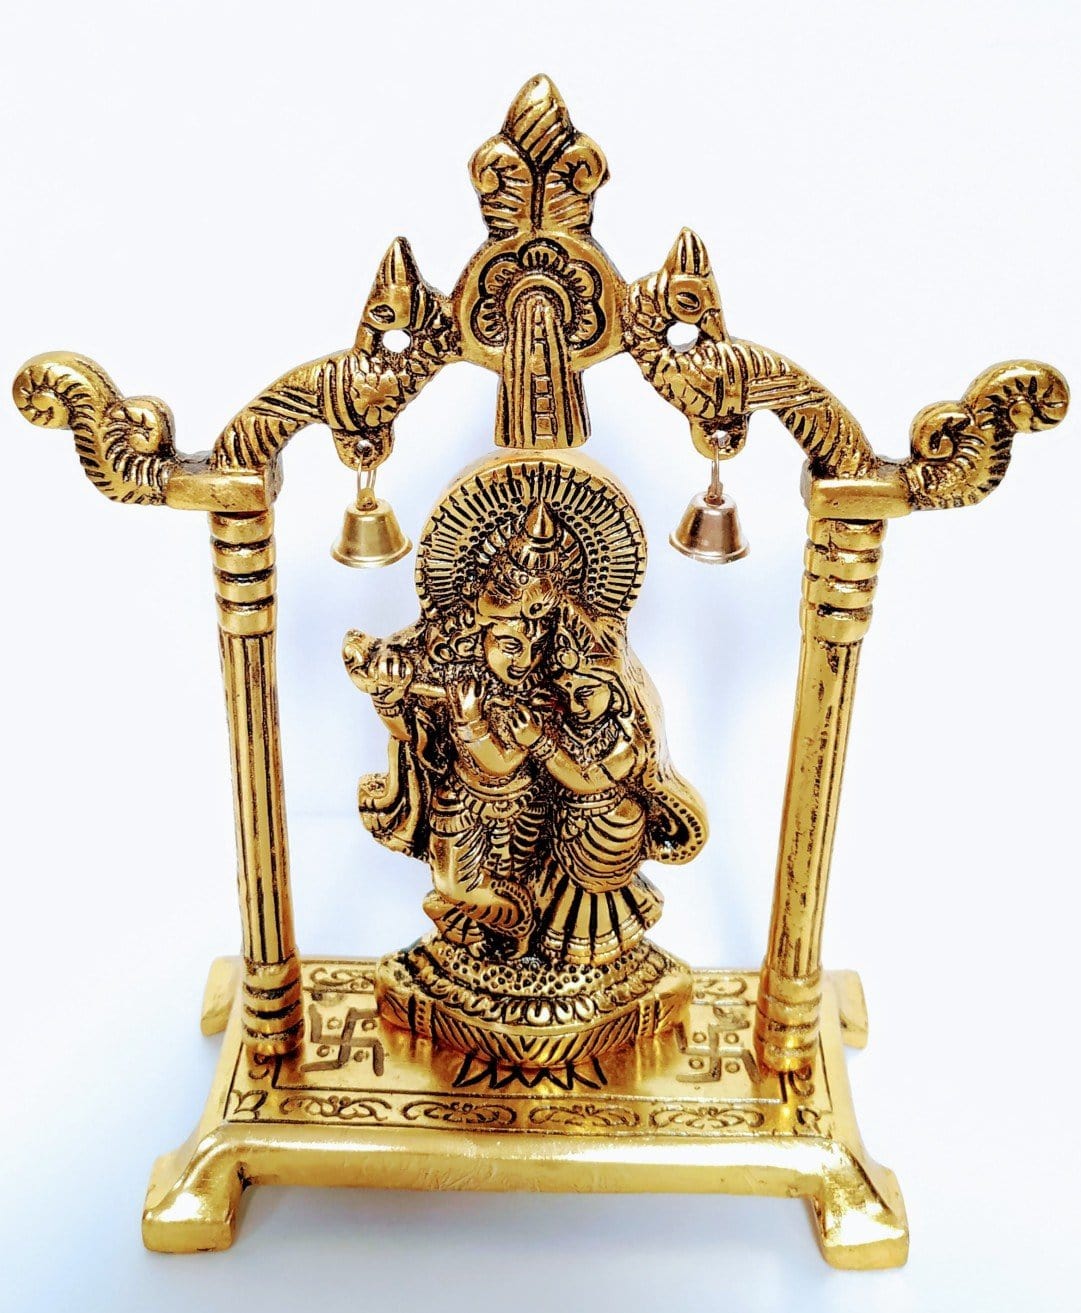 New Jaipur Handicraft Brass Showpiece Gold / 50 / Radha Krishna New Jaipur Handicraft™ (Pack of 50) Metal Radha Krishna statue for Gifting | at Rs 200 each